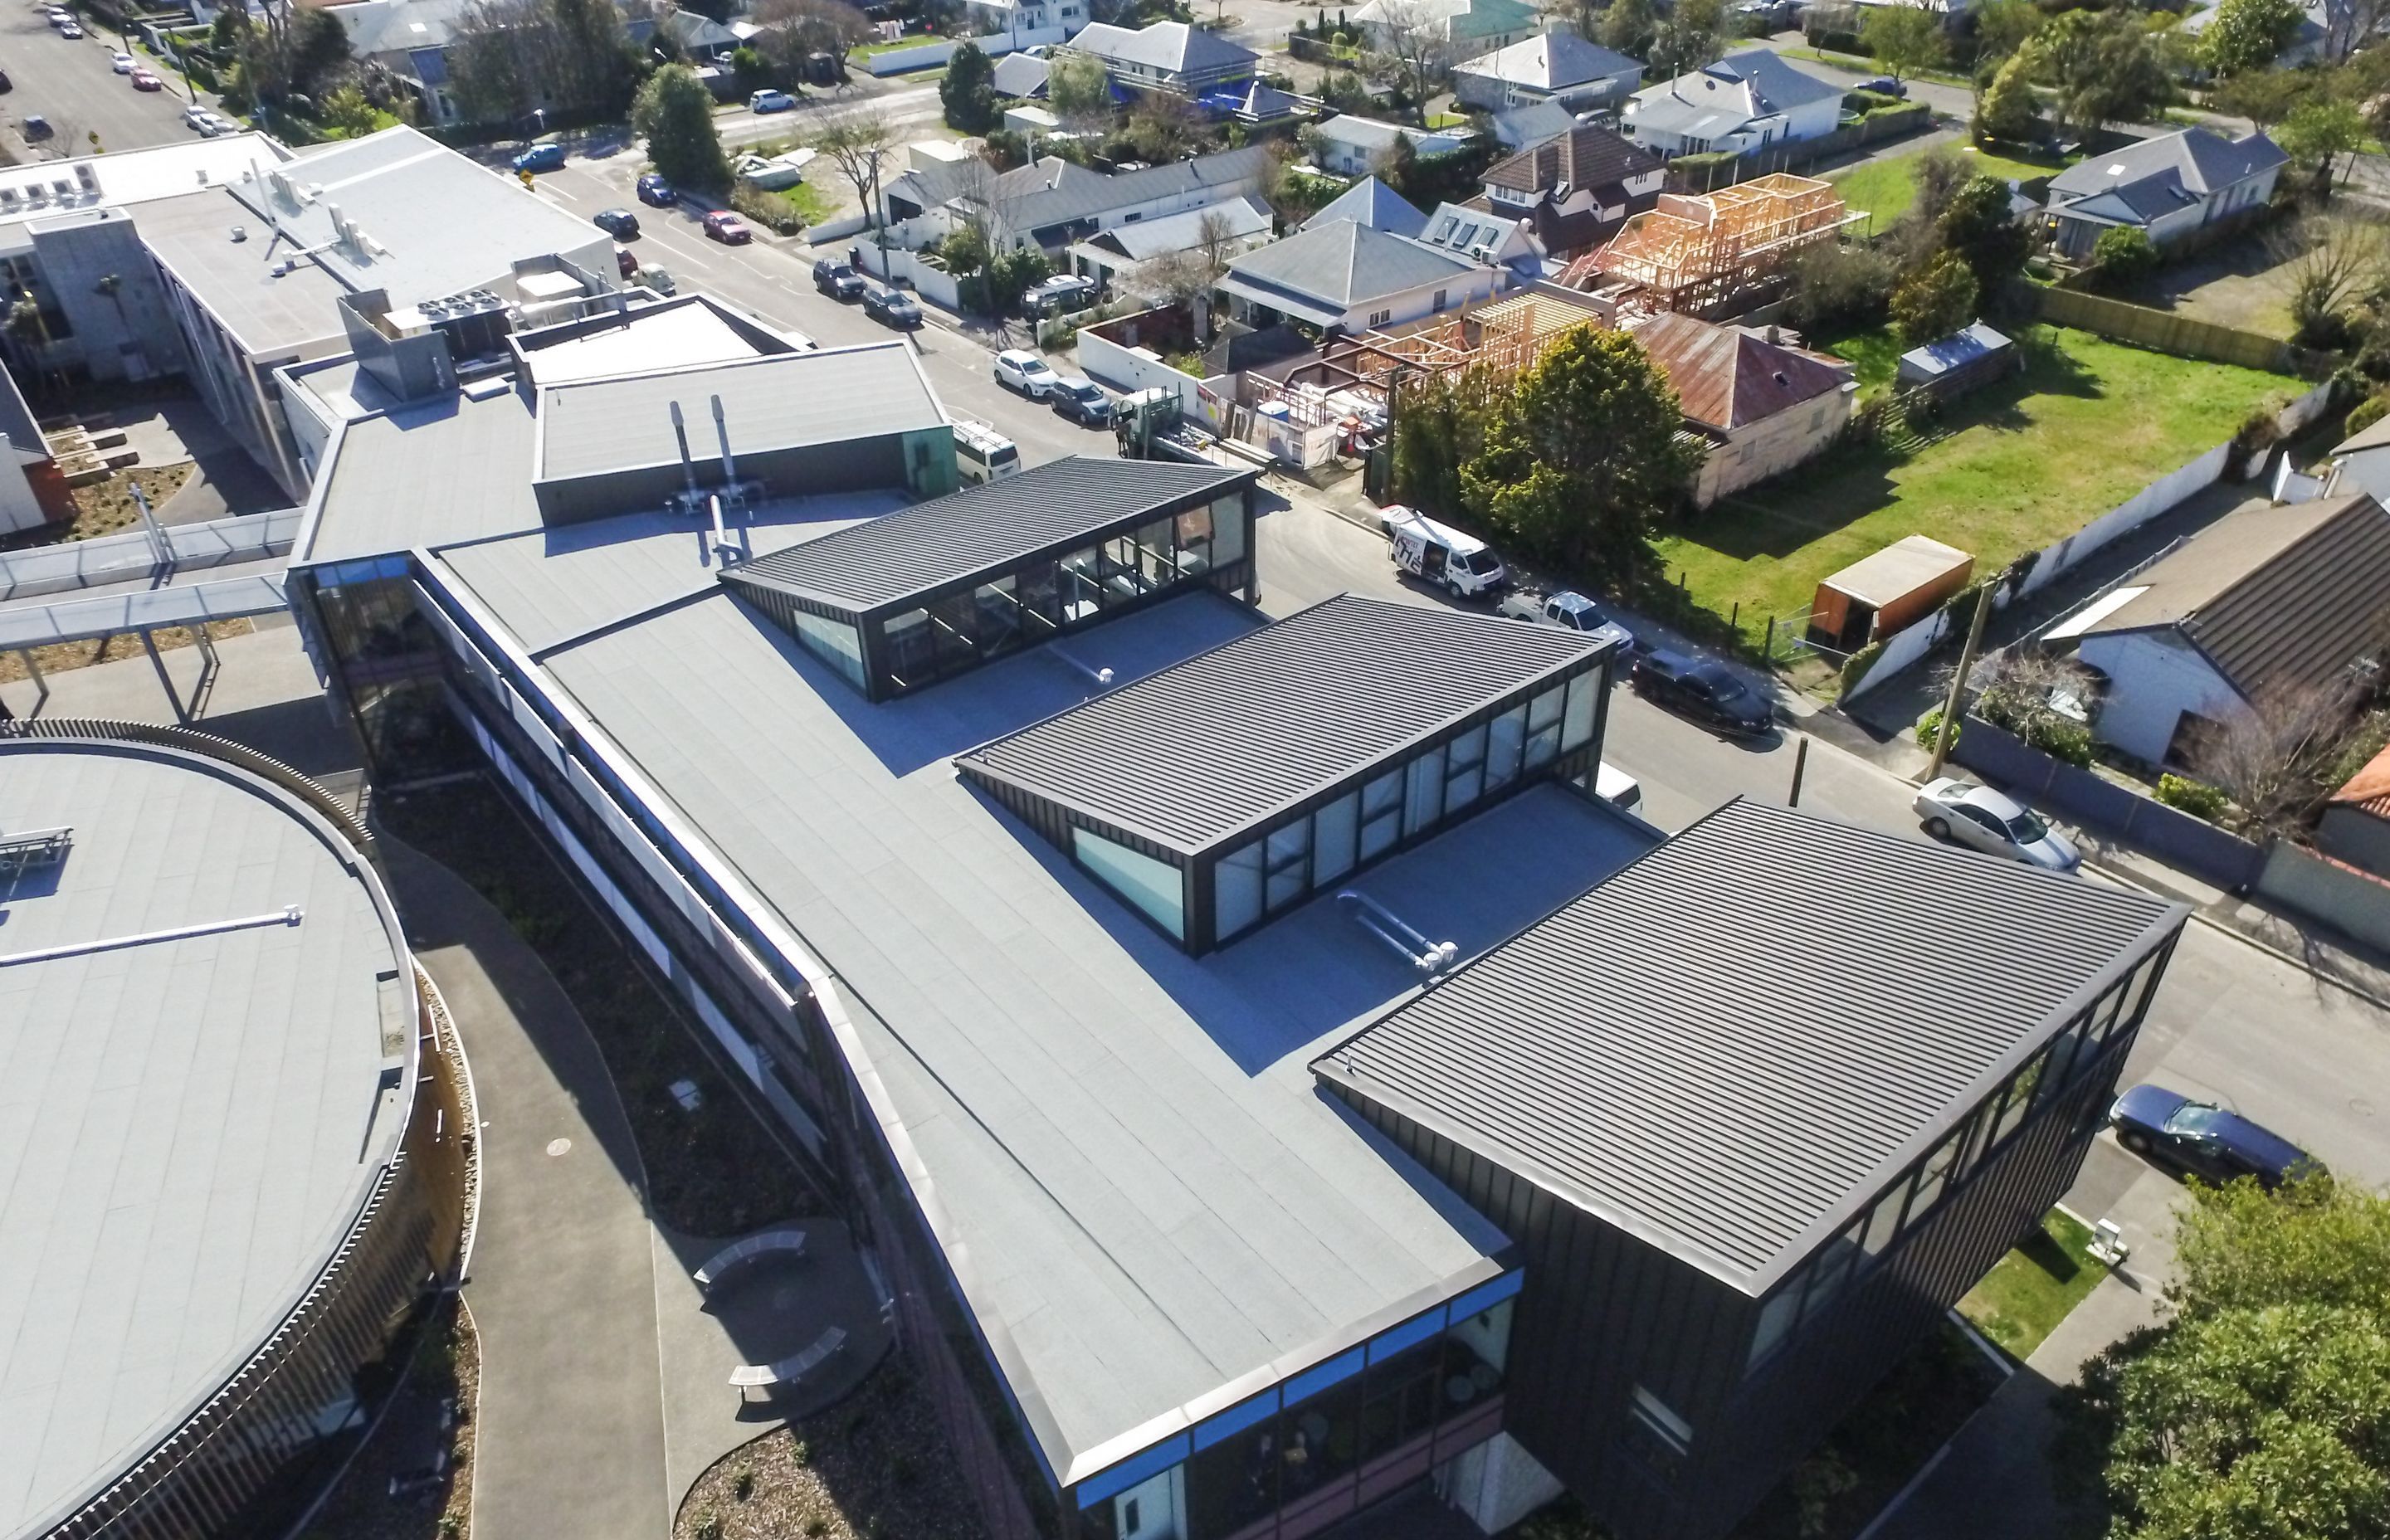 A secondary school in Rangi-Ruru, Christchurch featuring a DUOTHERM warm roof system by Equus Industries.